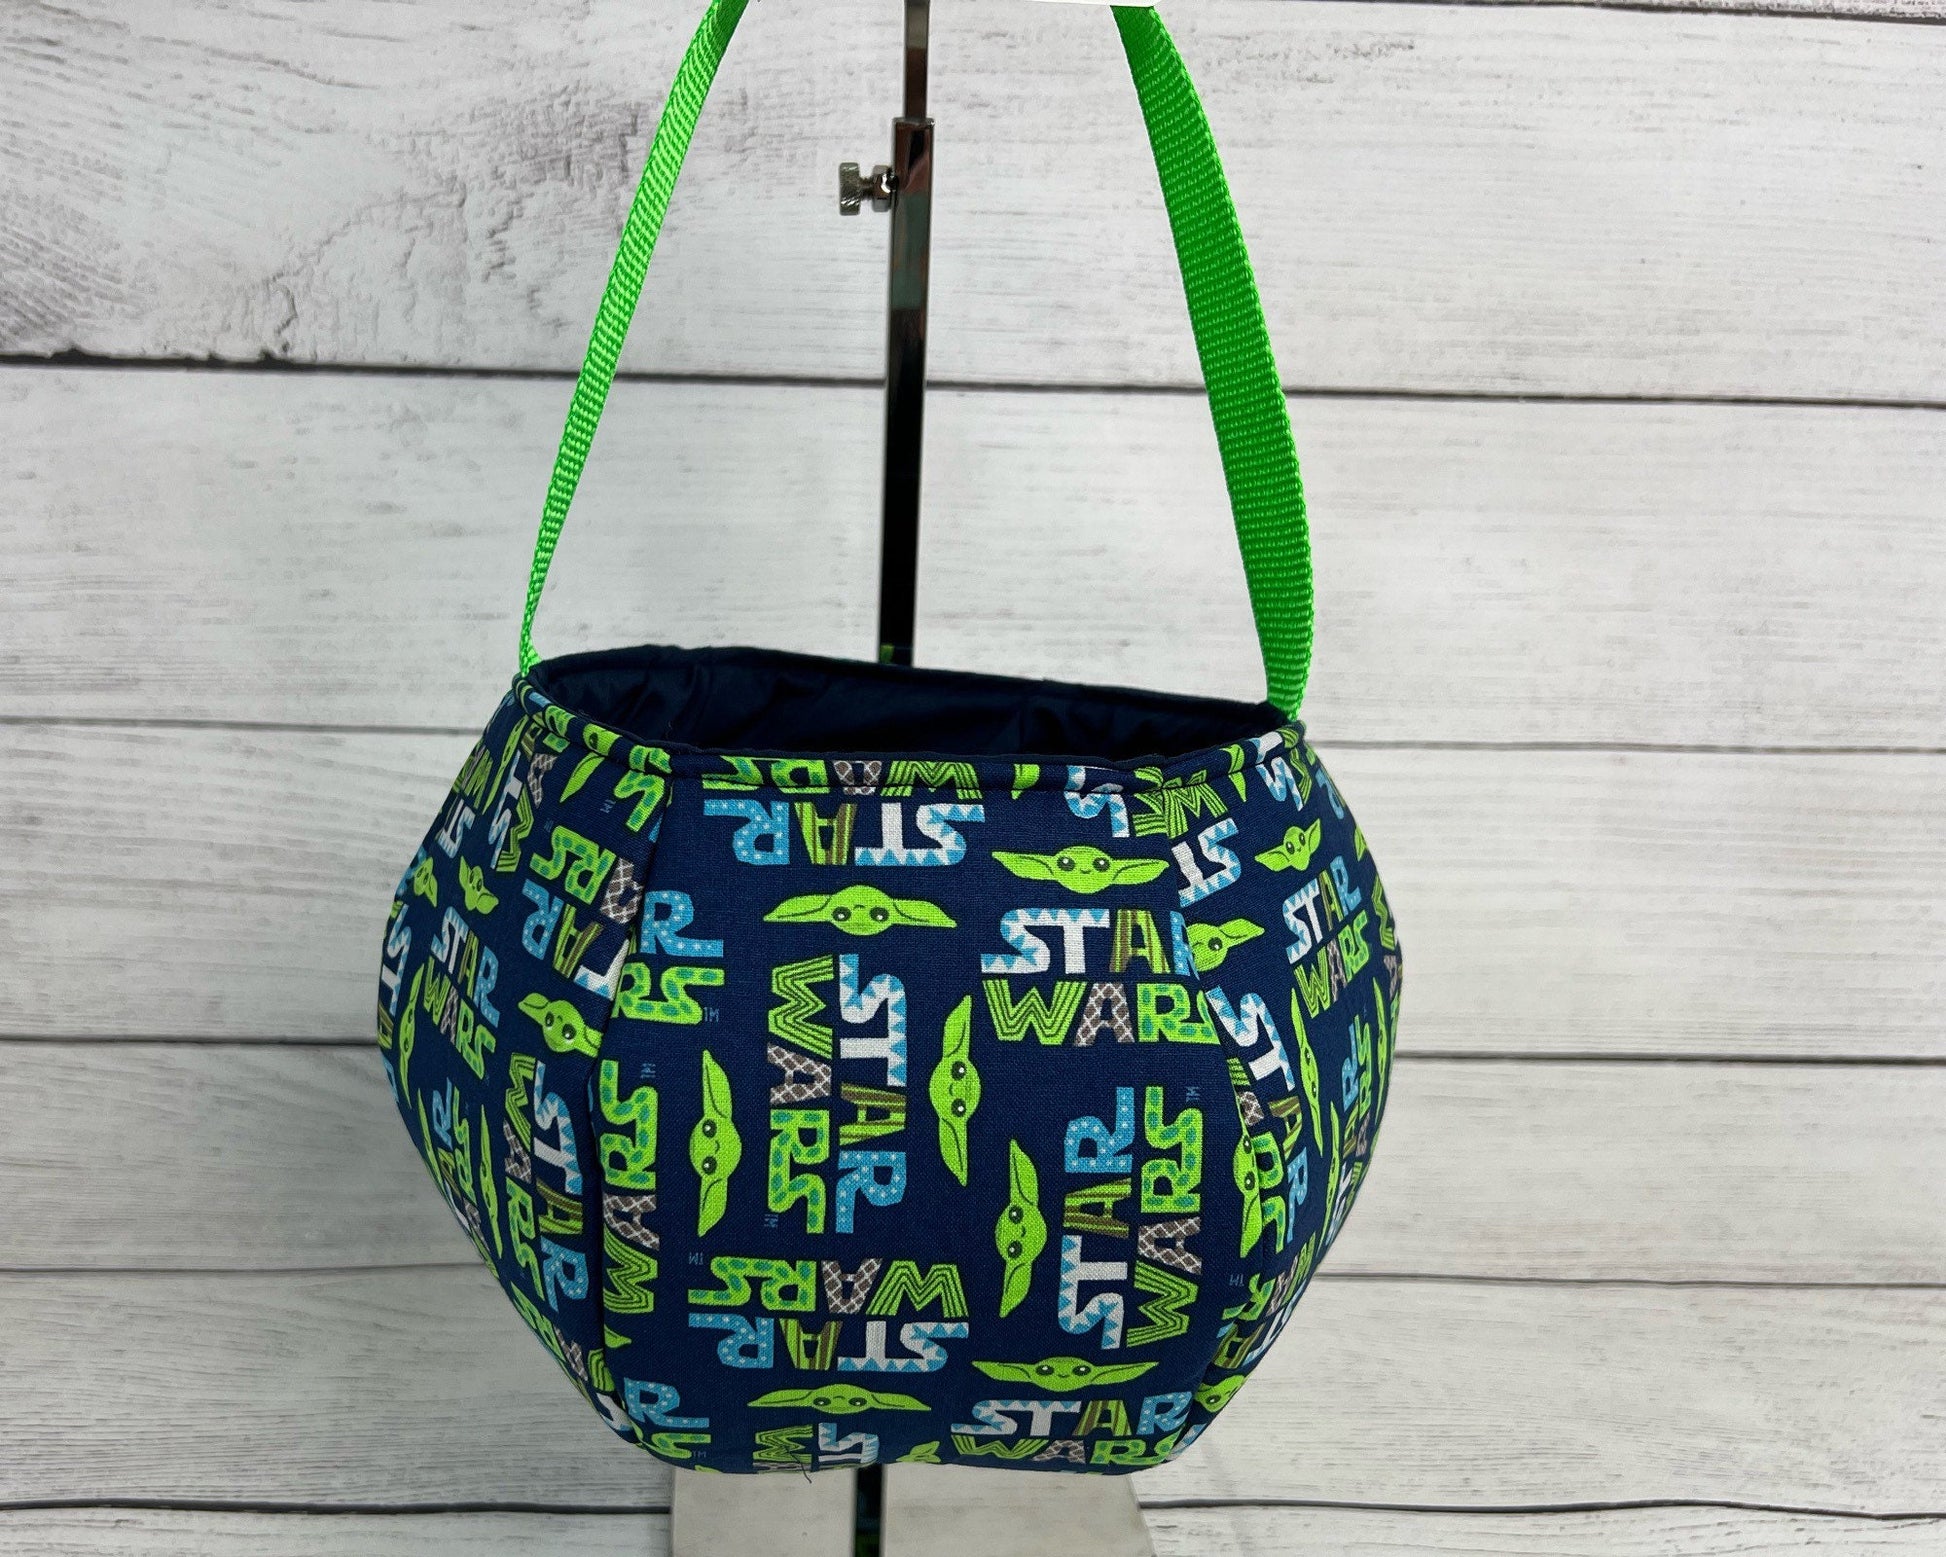 Star Wars Hand-Made Tote Bag - Rebels - Chewy - R2-D2 - Princess Leia - Yoda - Gift - Everyday - Easter - Holiday - Halloween